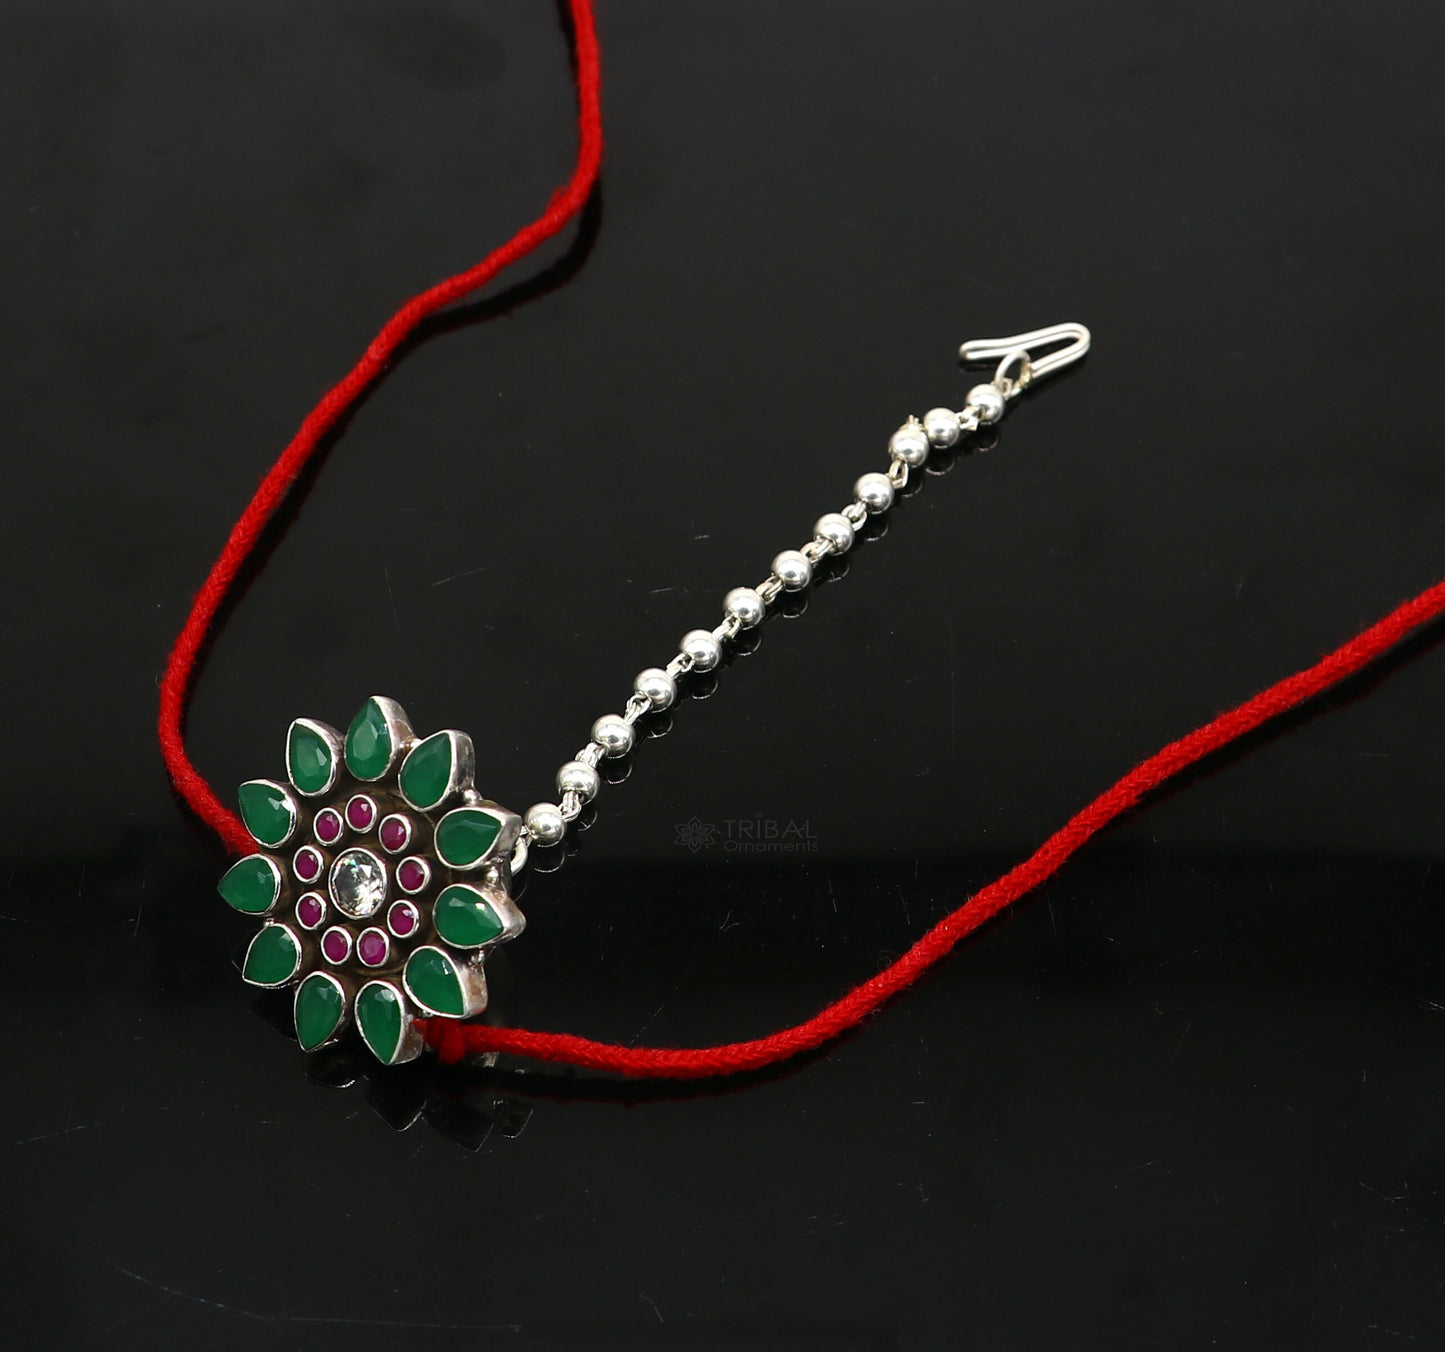 925 sterling silver handmade traditional design Mangtika, mangtika is a stunning and elegant piece of hair/ head jewelry, brides gift MT27 - TRIBAL ORNAMENTS